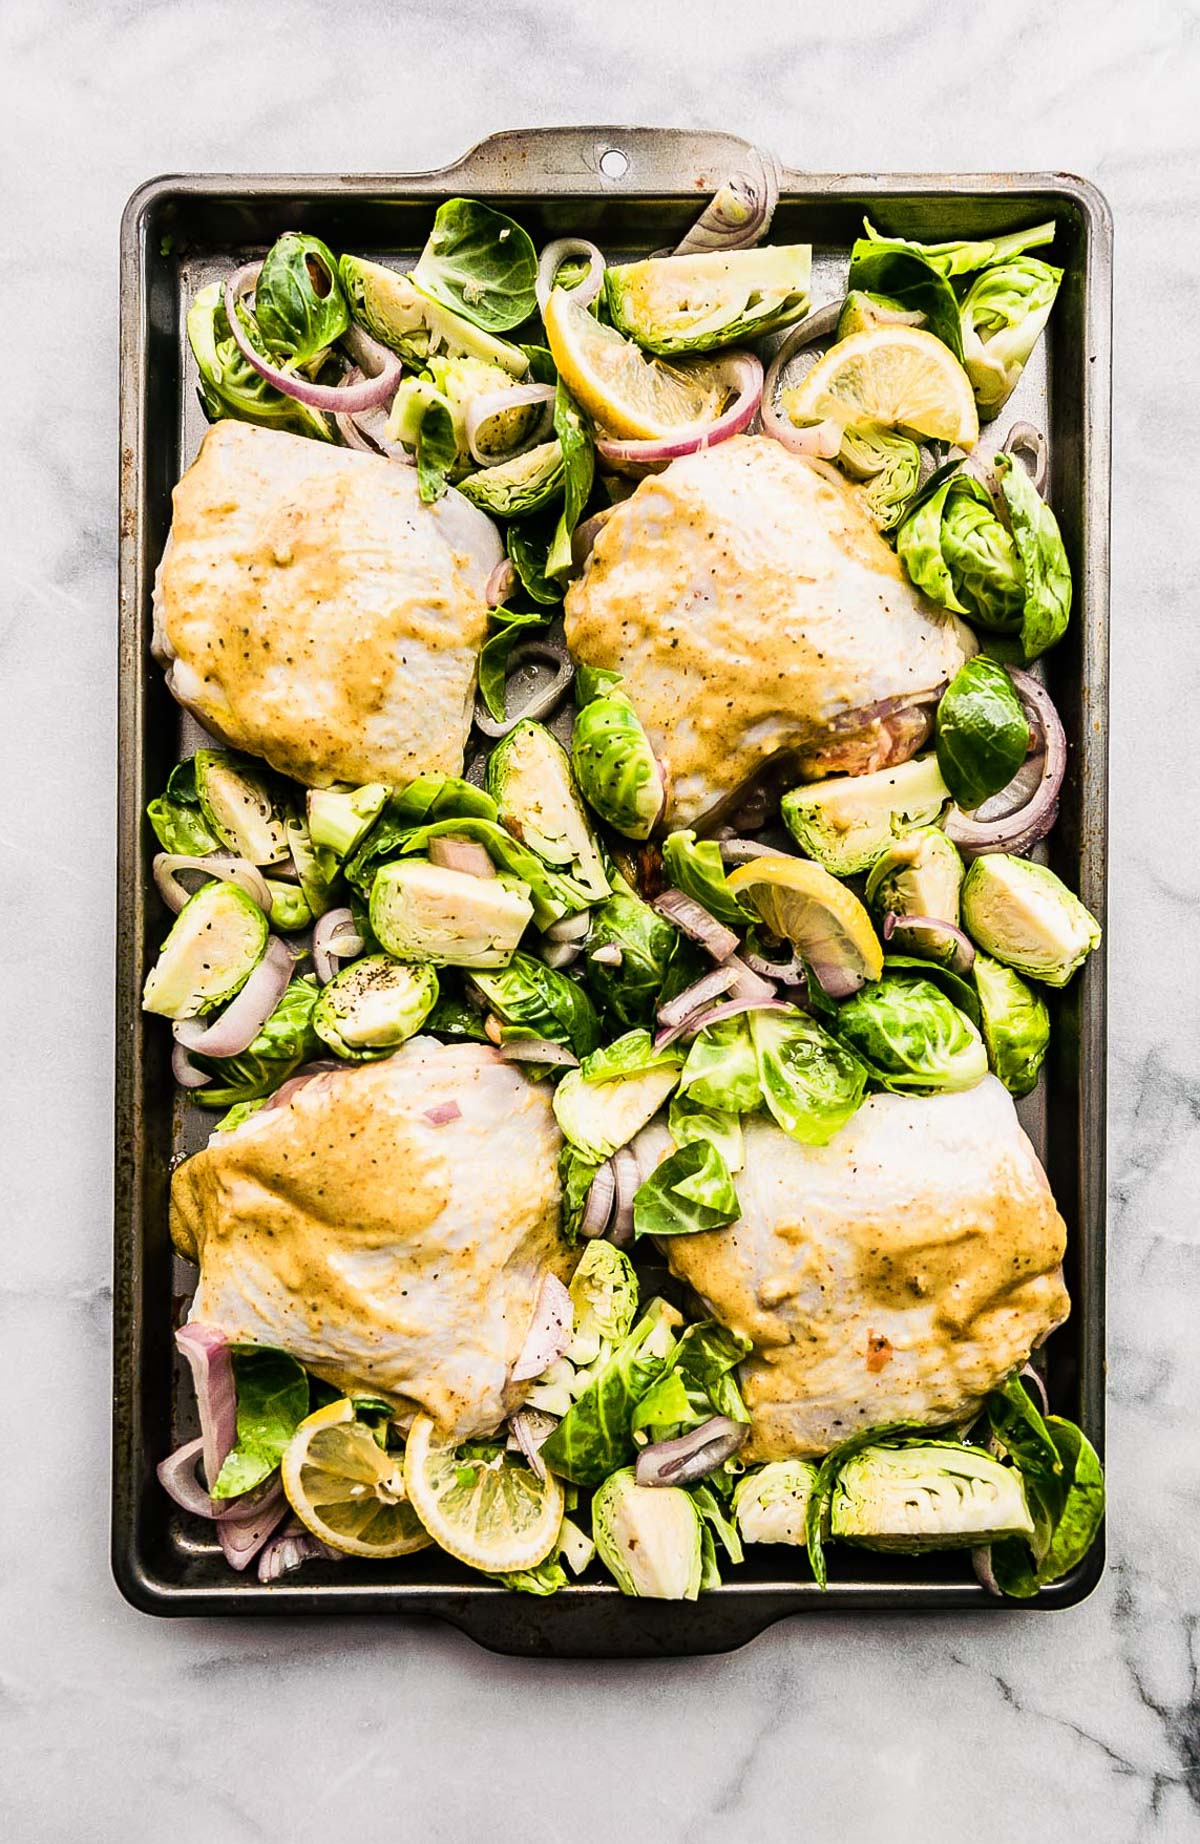 Sheet pan filled with honey mustard raw chicken thighs nestled between sliced Brussels sprouts and red onions